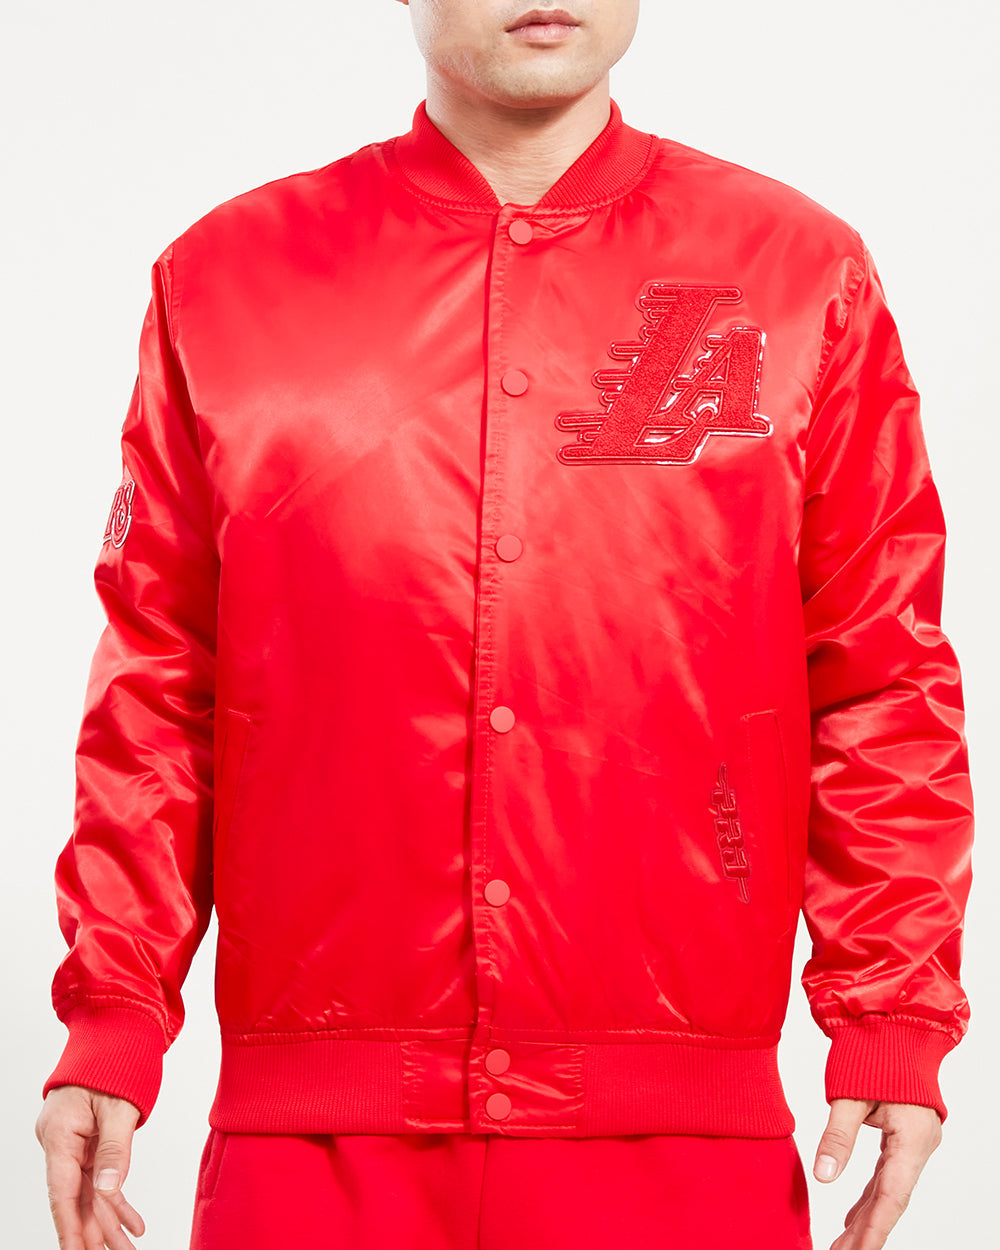 LOS ANGELES LAKERS CLASSIC TRIPLE RED SATIN JACKET (TRIPLE RED)